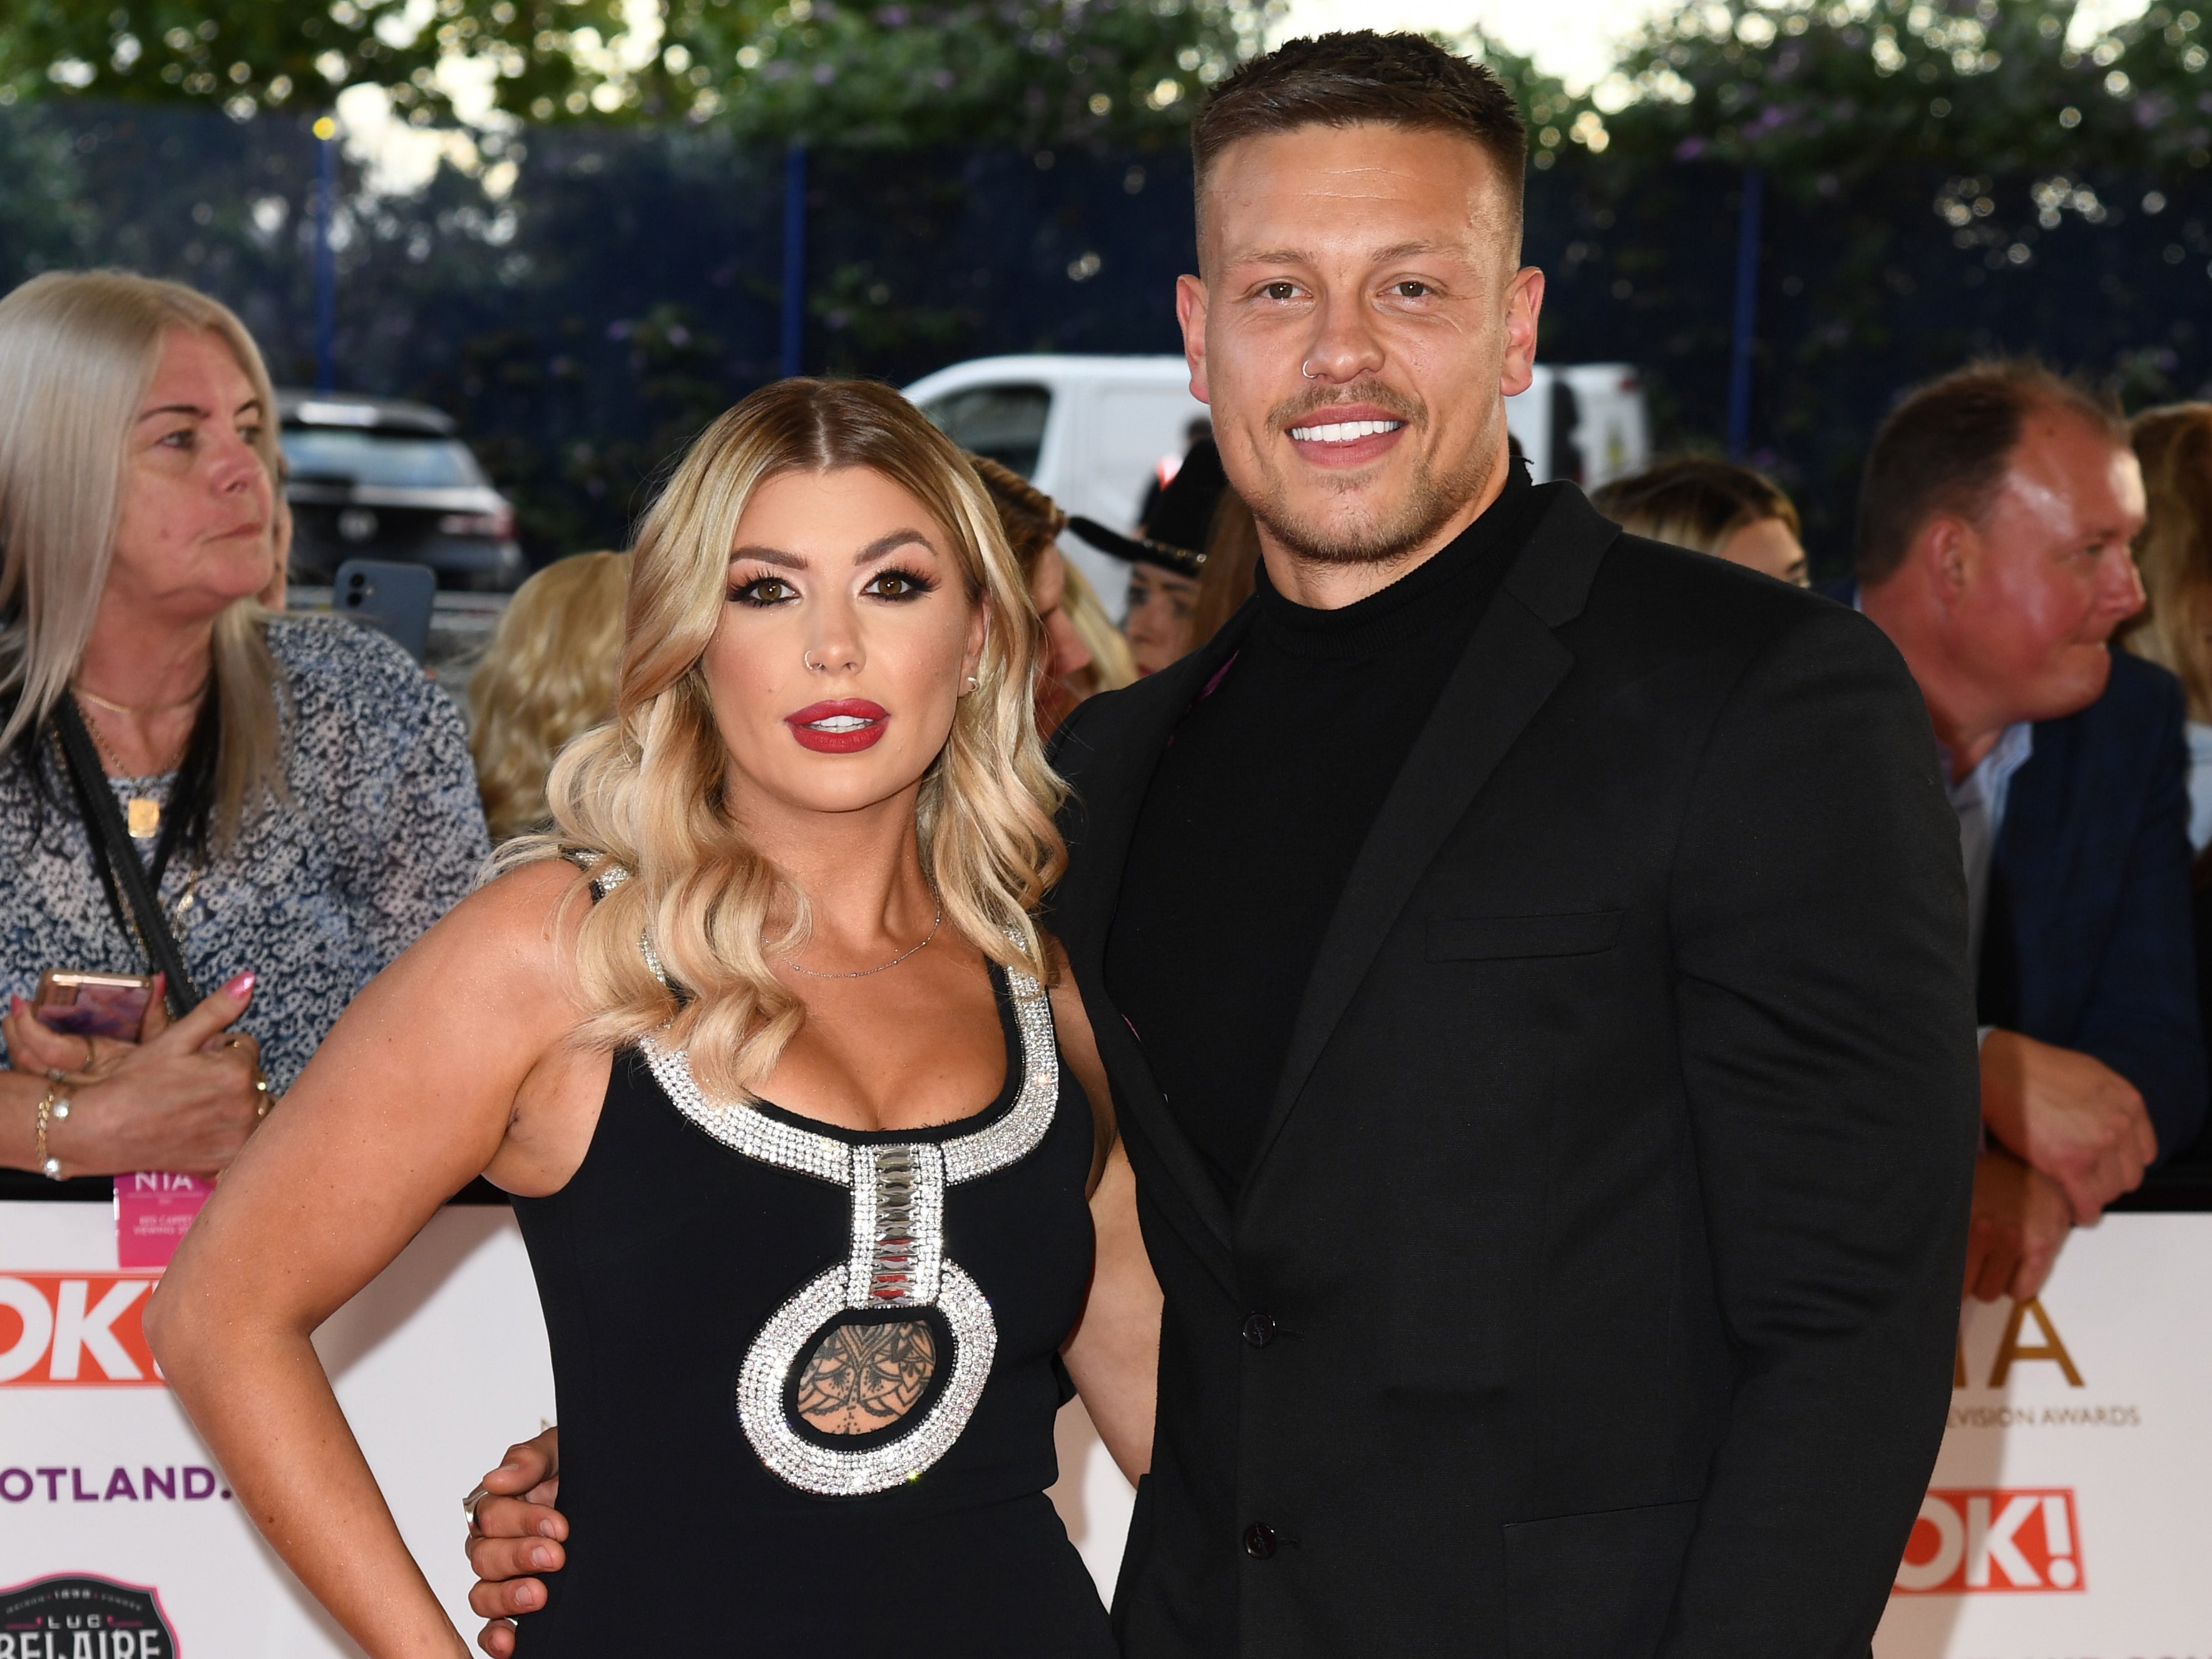 Ex-Love Islanders Olivia and Alex Bowen announce pregnancy This year we get to meet Baby Bowen The Independent